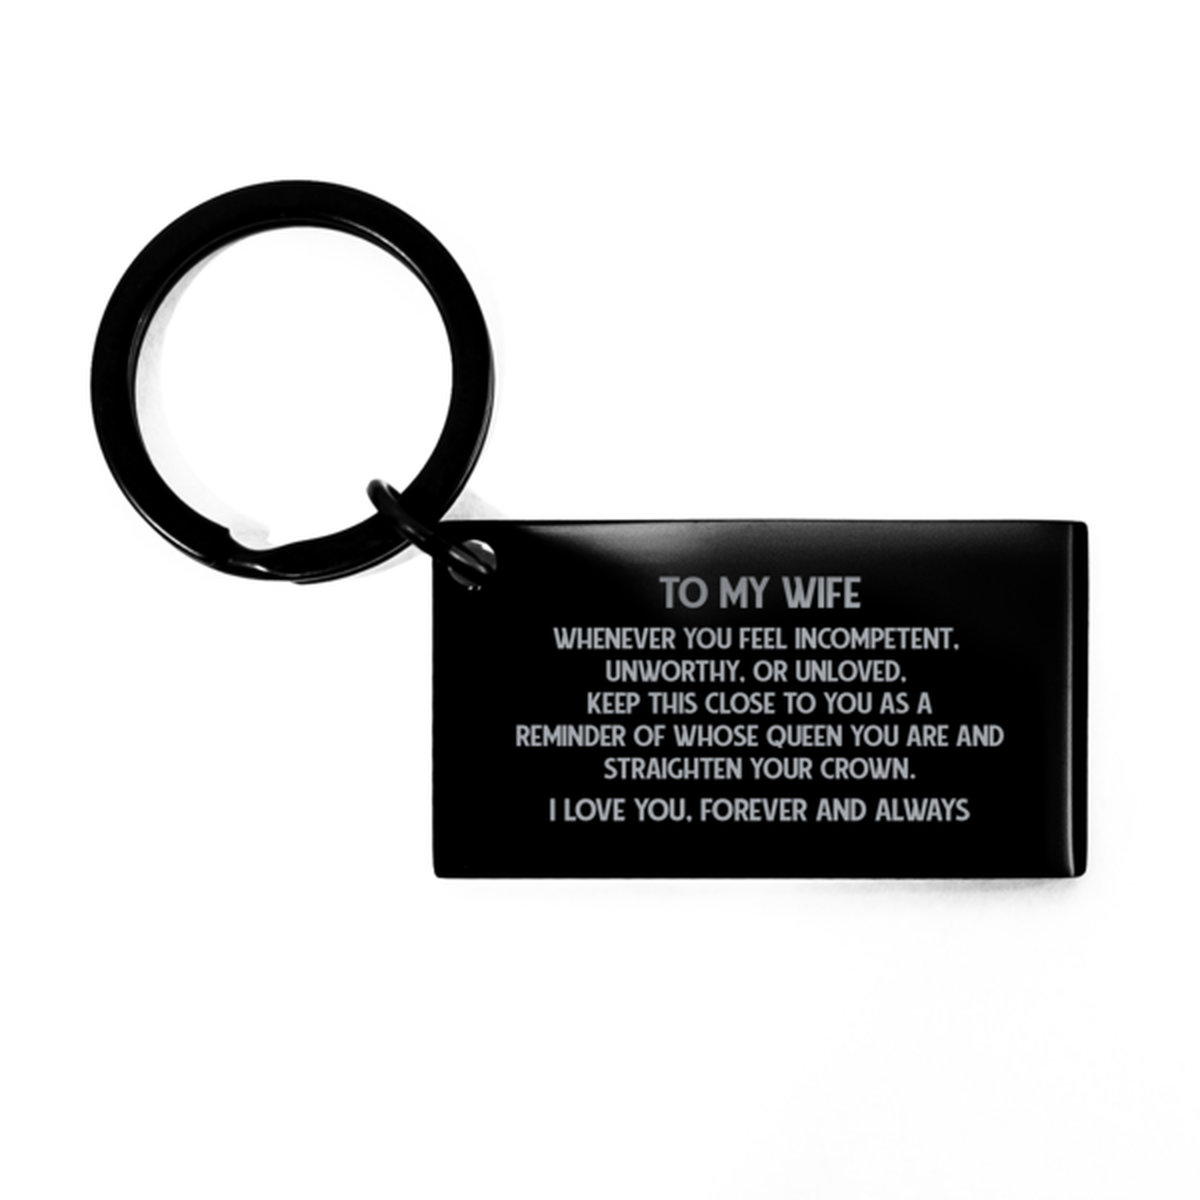 To My Wife Black Keychain, Whenever You Feel Incompetent, Birthday Gifts For Wife From Husband, Valentines Gifts For Women